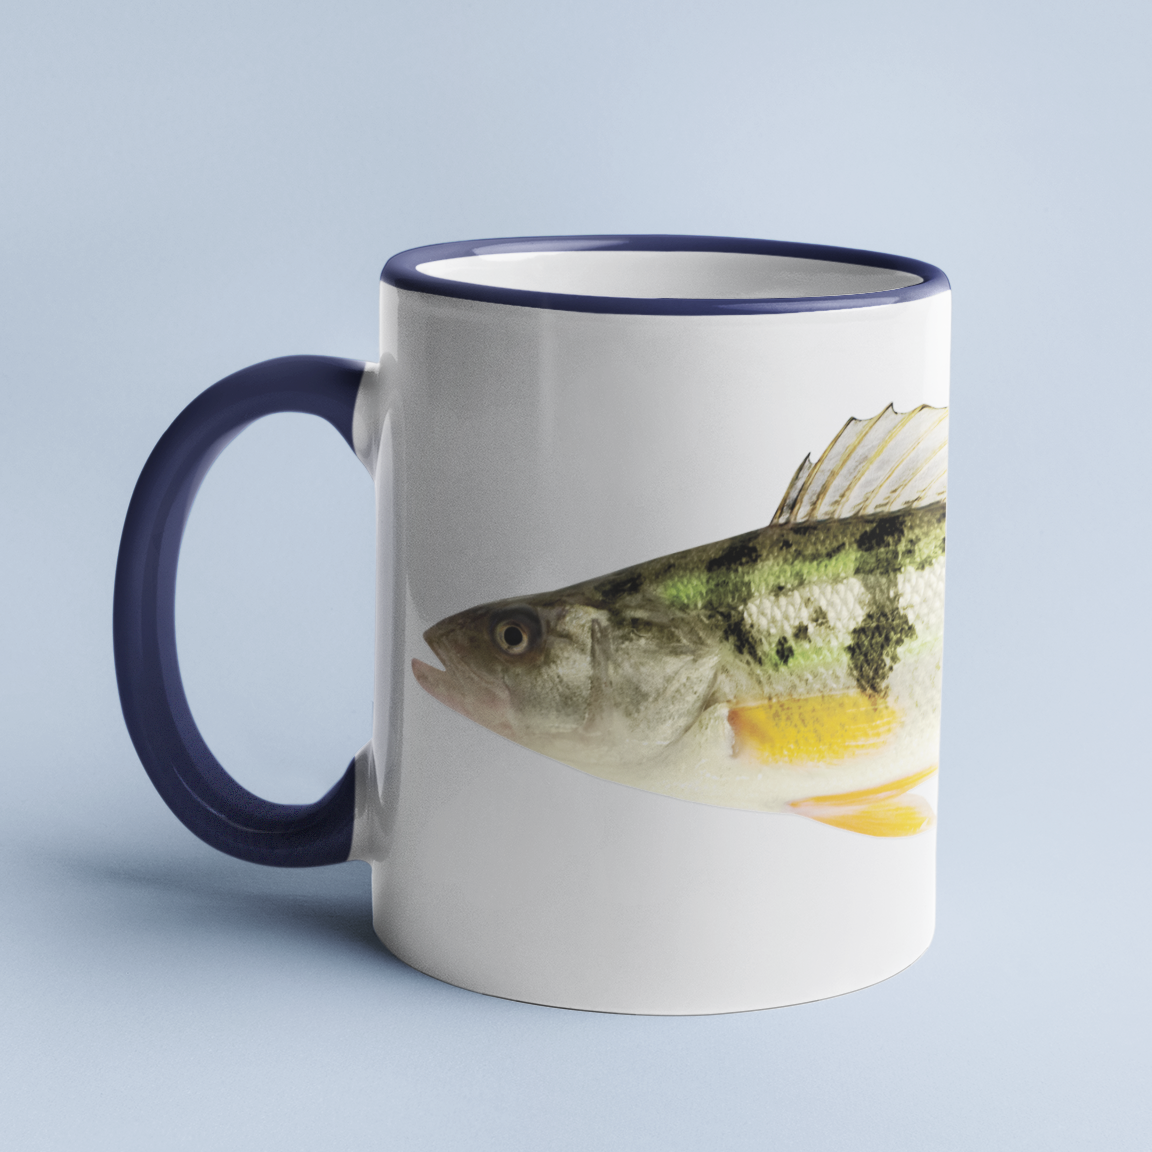 Yellow Perch accent mug with dark blue handle on light blue background.